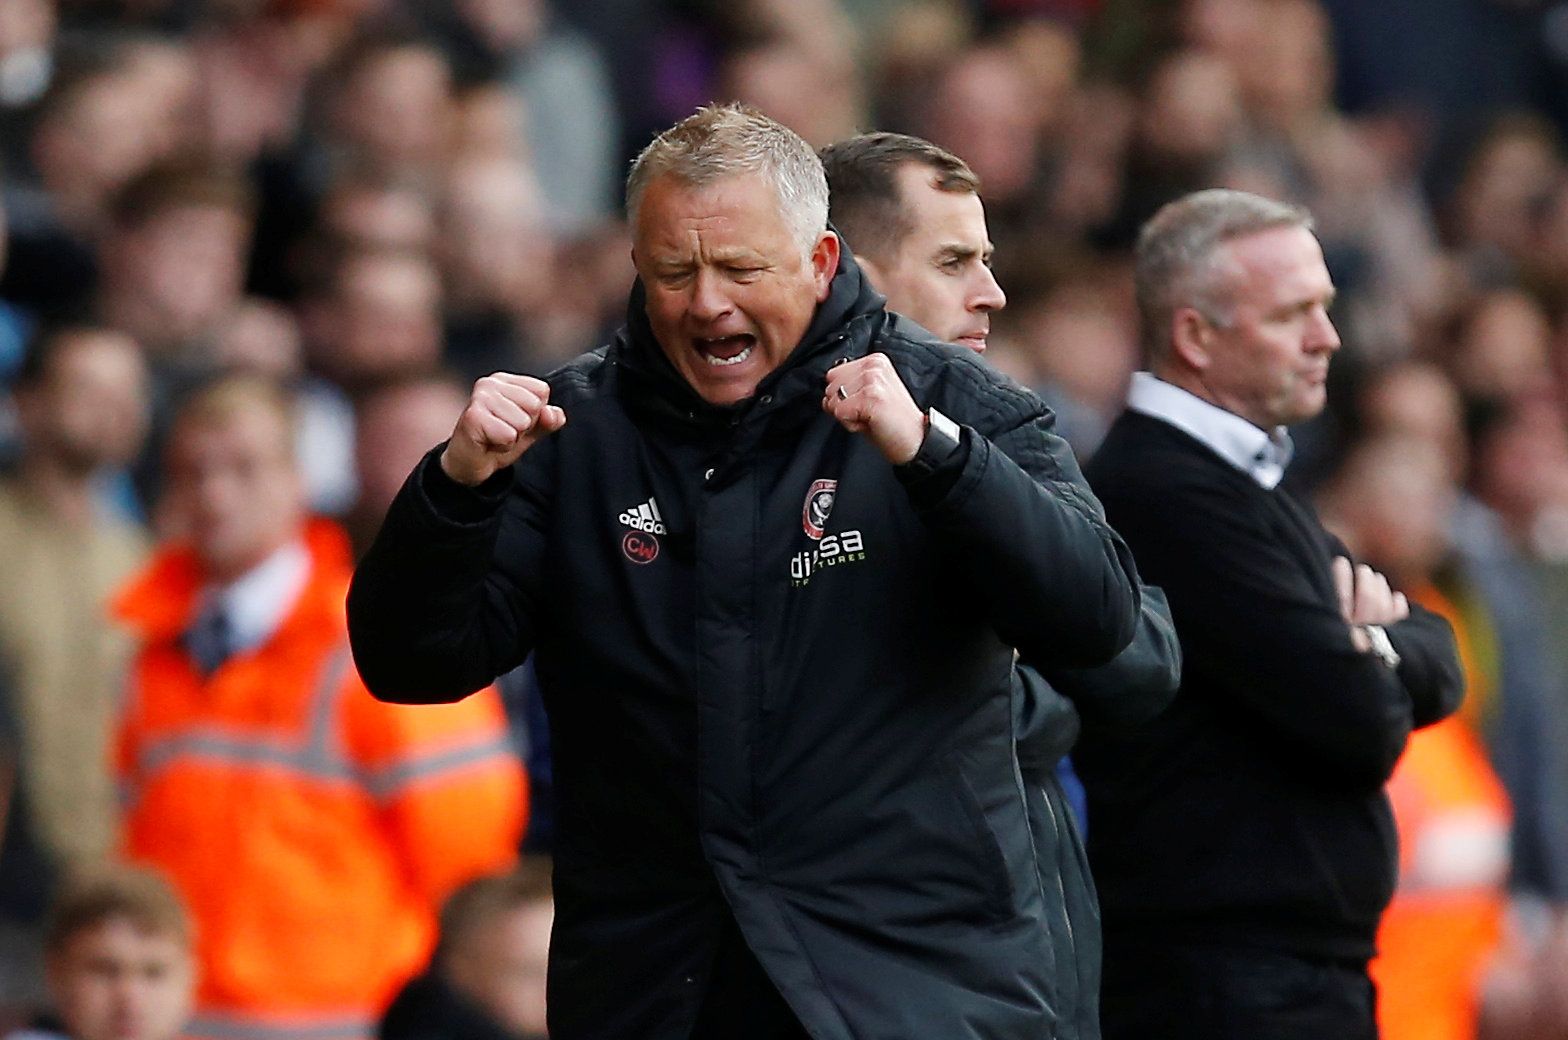 Soccer Football - Championship - Sheffield United v Ipswich Town - Bramall Lane, Sheffield, Britain - April 27, 2019   Sheffield United manager Chris Wilder celebrates after the match as Ipswich manager Paul Lambert looks dejected   Action Images/Craig Brough    EDITORIAL USE ONLY. No use with unauthorized audio, video, data, fixture lists, club/league logos or 